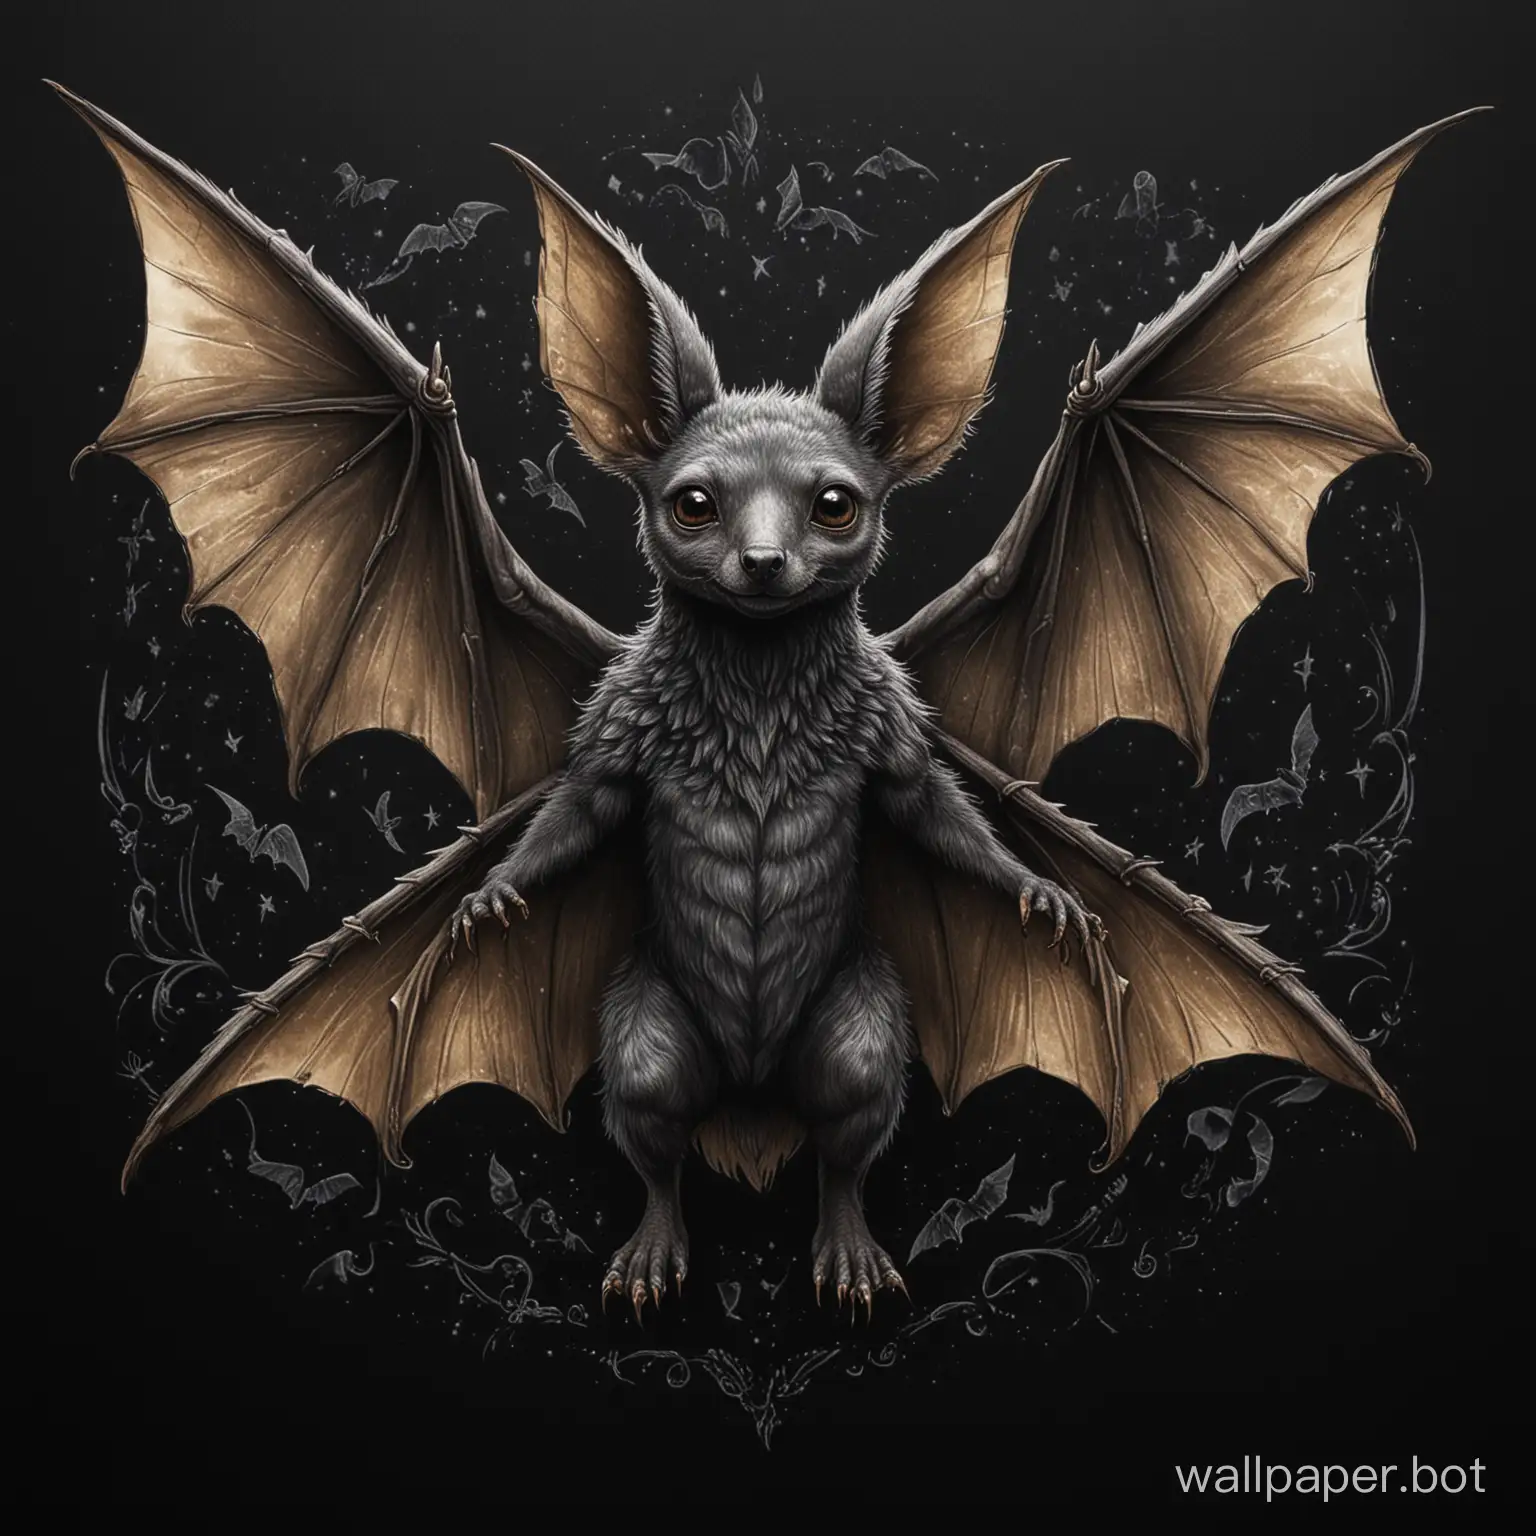 Draw on a black background Kolovyortysh - a mythical creature resembling a small kangaroo with wings of a bat and a human face.